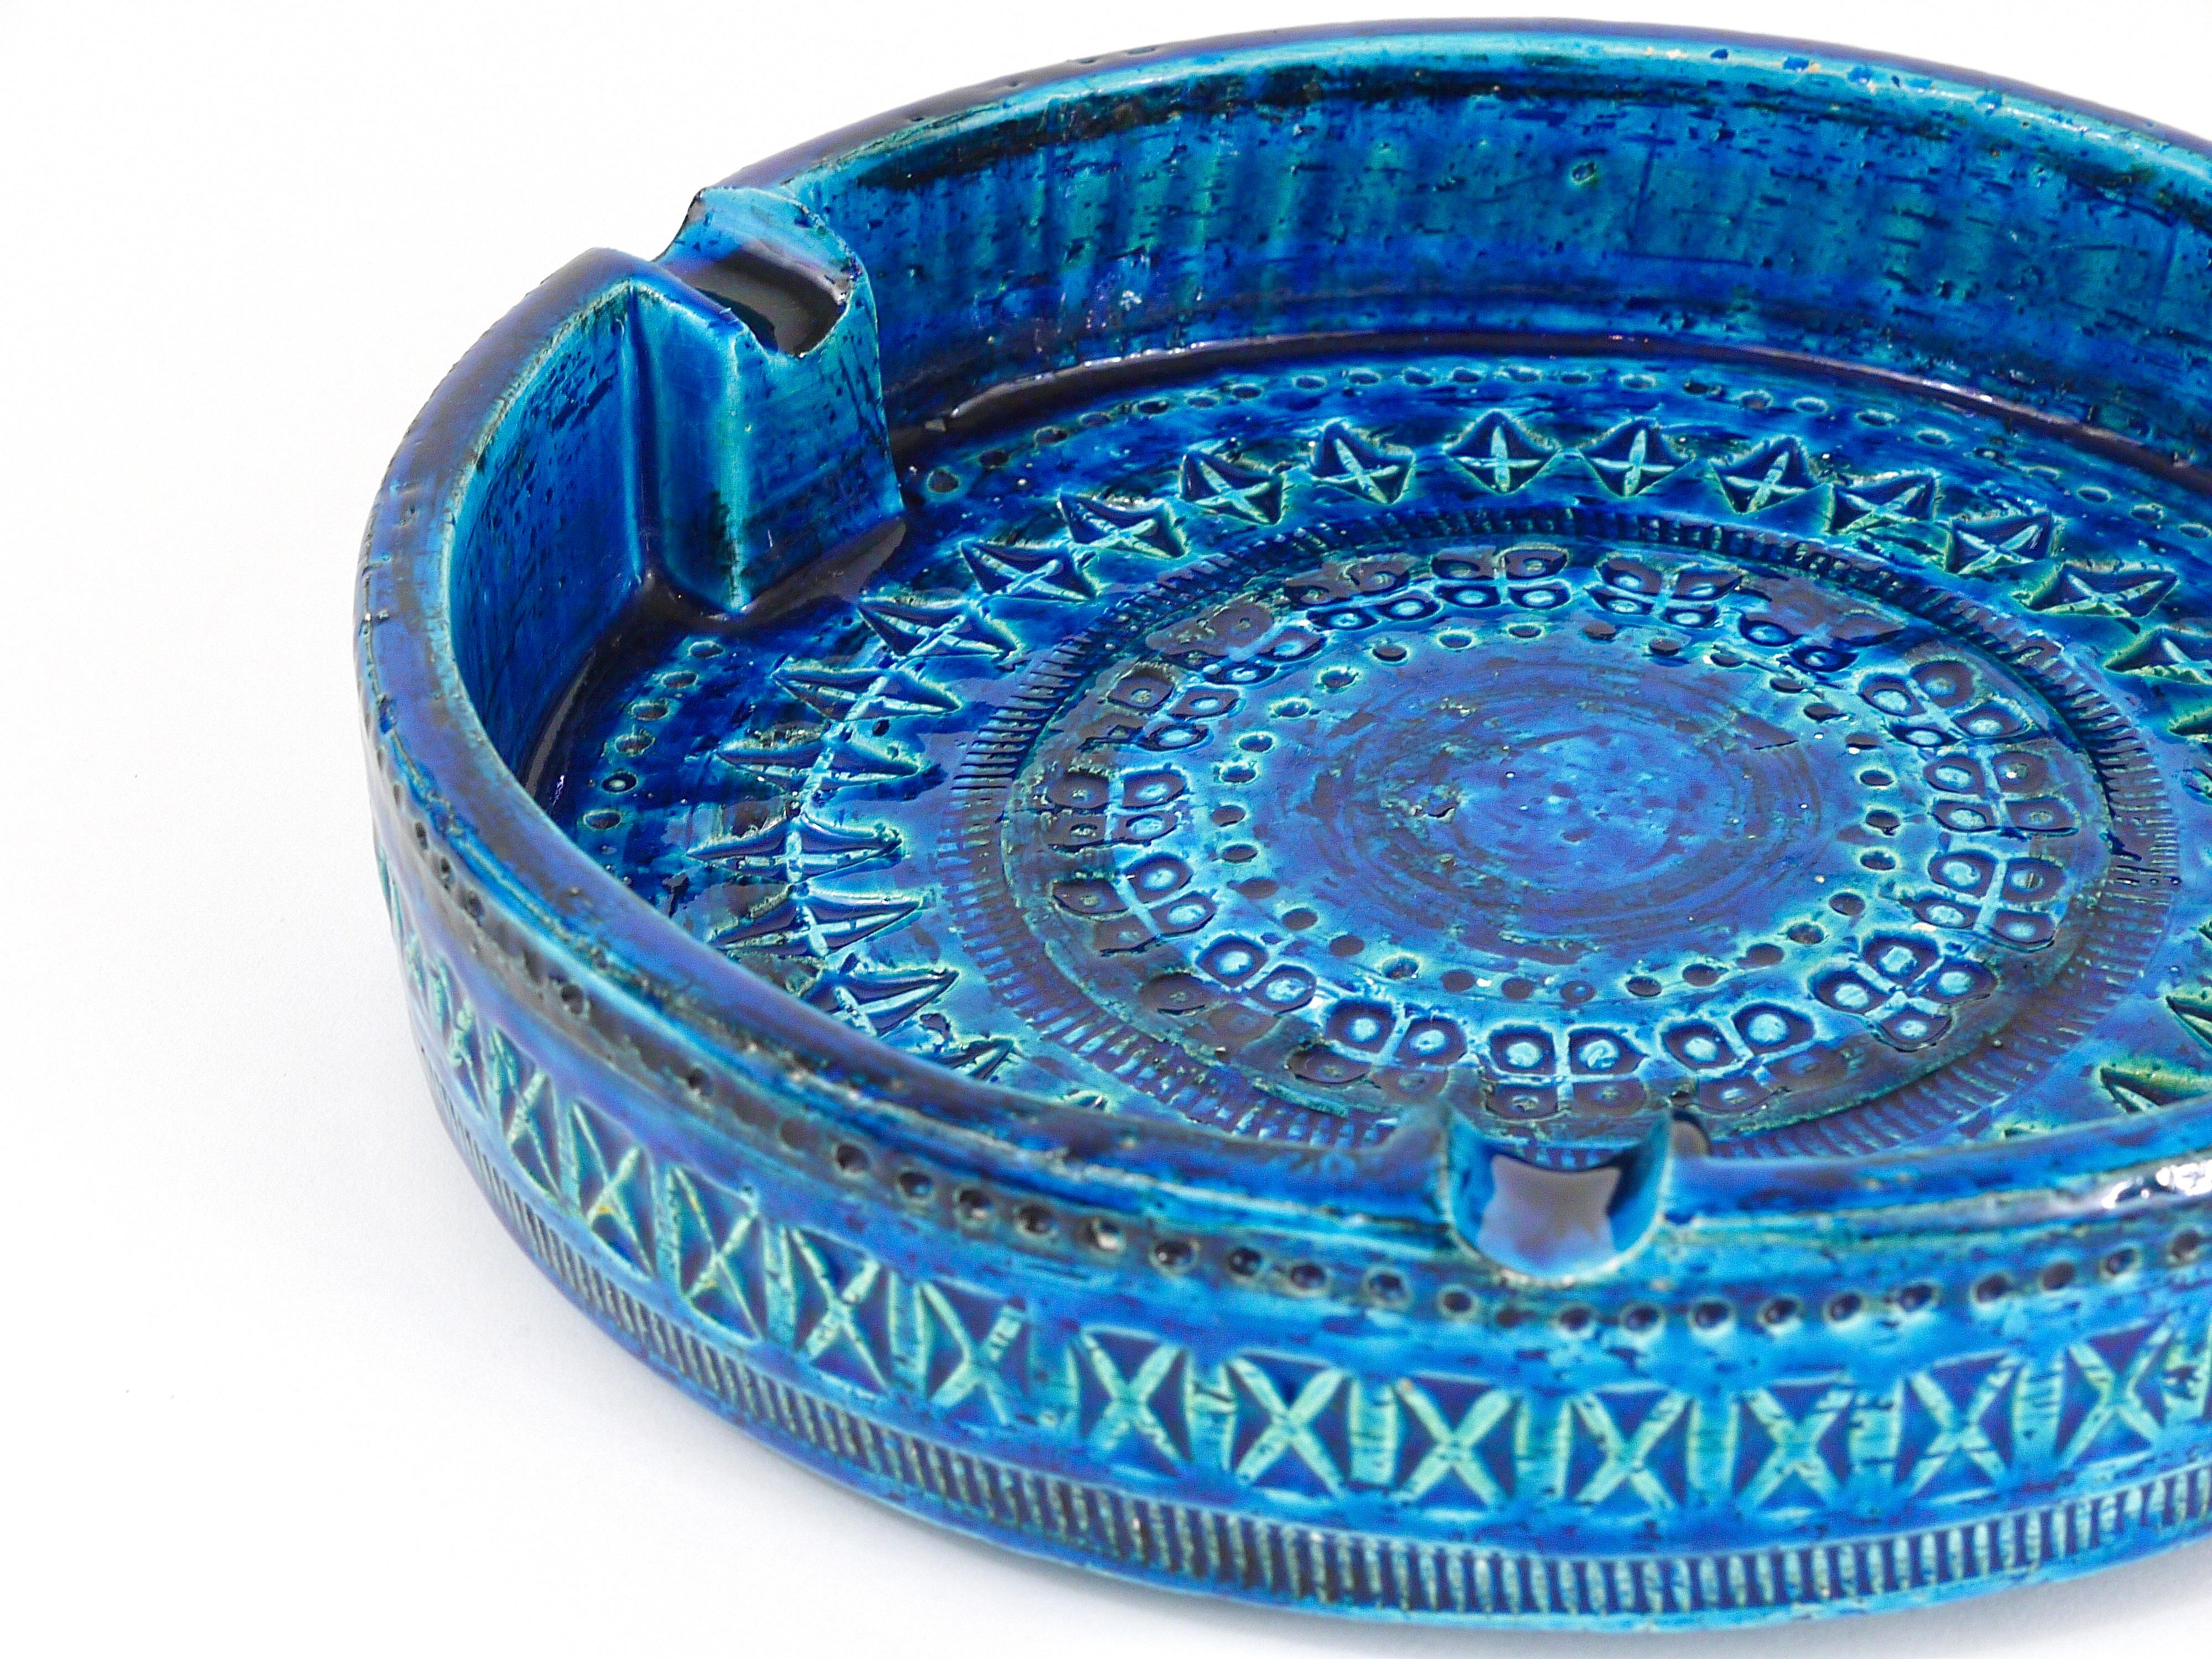 A beautiful, decorative midcentury Rimini blue glazed ashtray. Very large, has a diameter of 9 1/2 inches, Designed by Aldo Londi, manufactured by Bitossi Ceramiche / Italy in the 1950s. Handcrafted with hand carved geometric design in a glazed